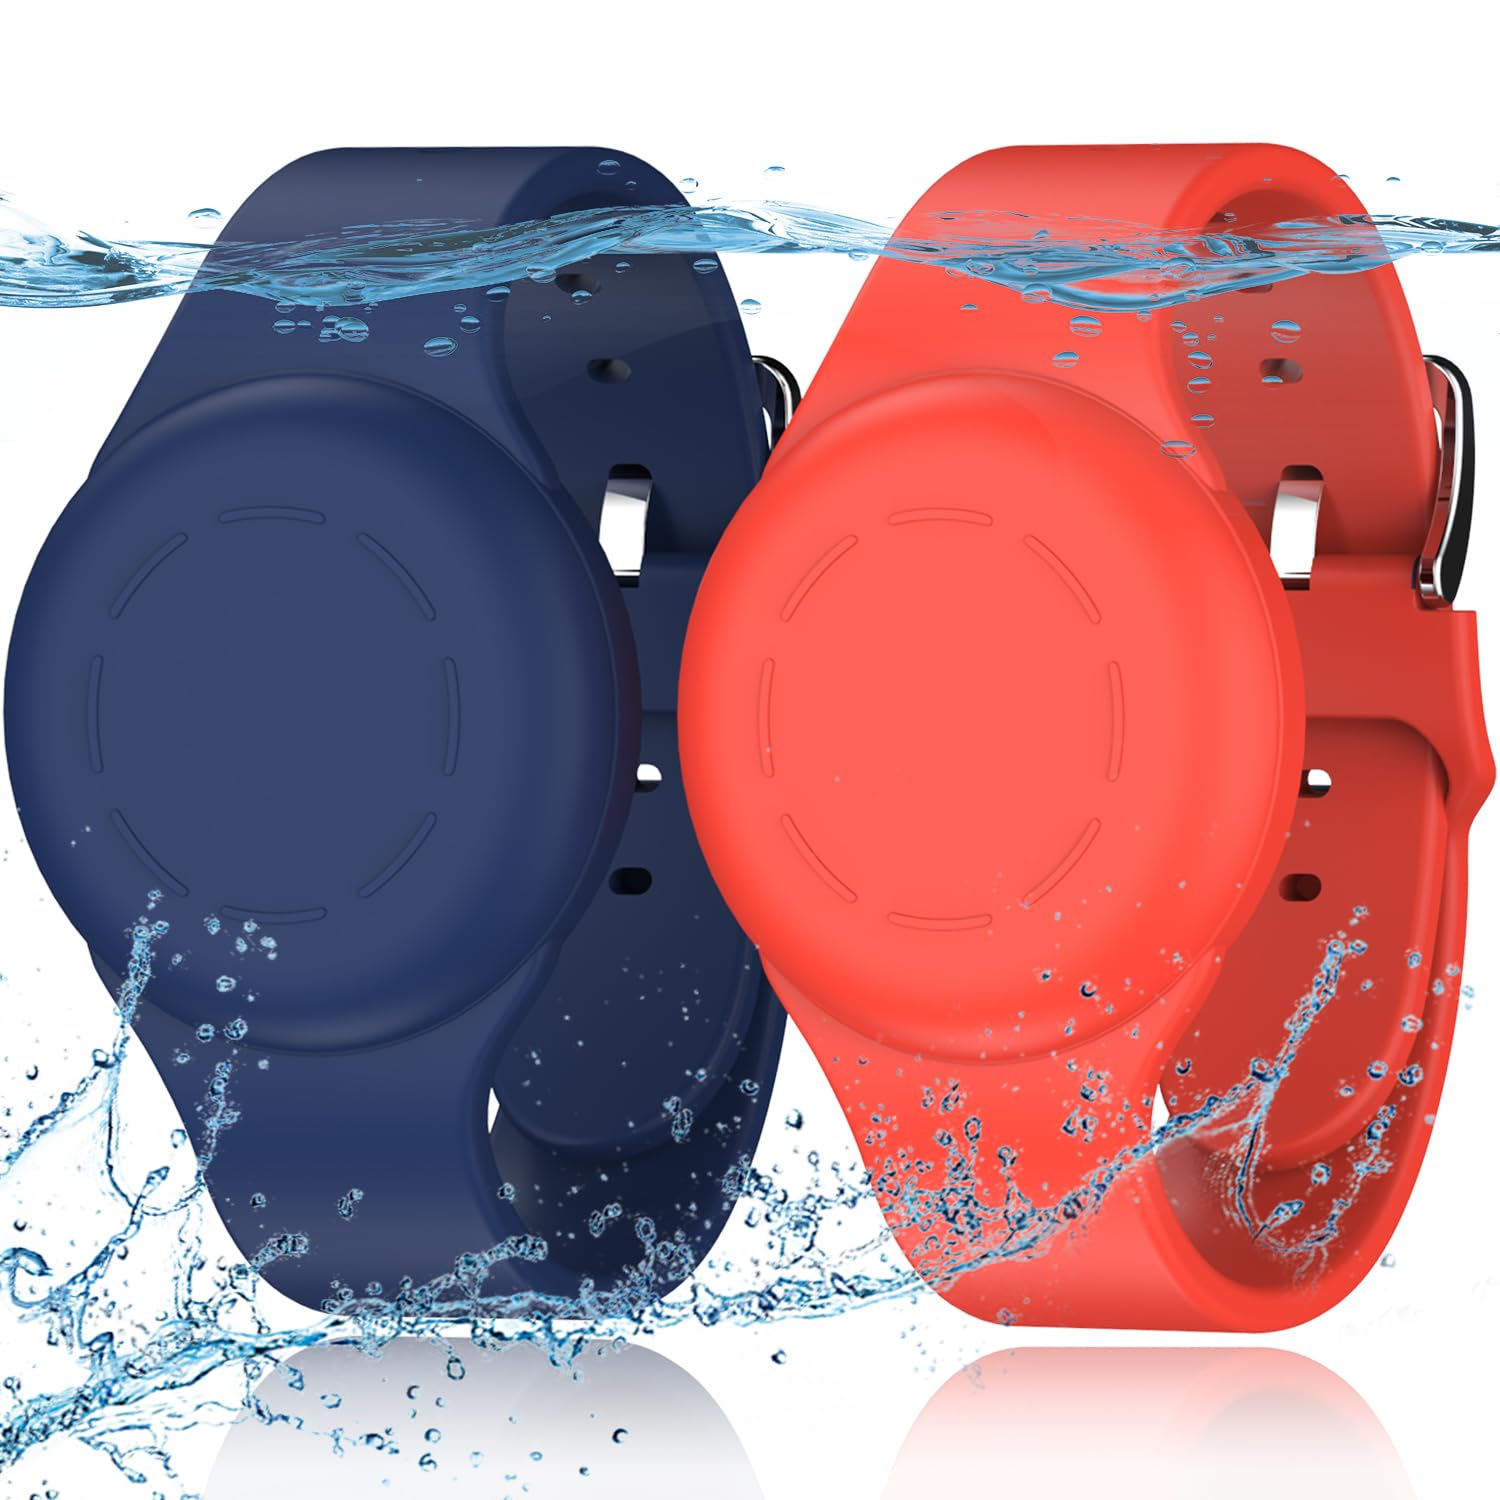 R-fun Waterproof Air Tag Bracelets for Kids [2 Pack] Compatible with Apple Air Tag Finders with Soft Silicone,Anti Lost GPS Item Finders Case Cover for Kids,Night Blue/Red